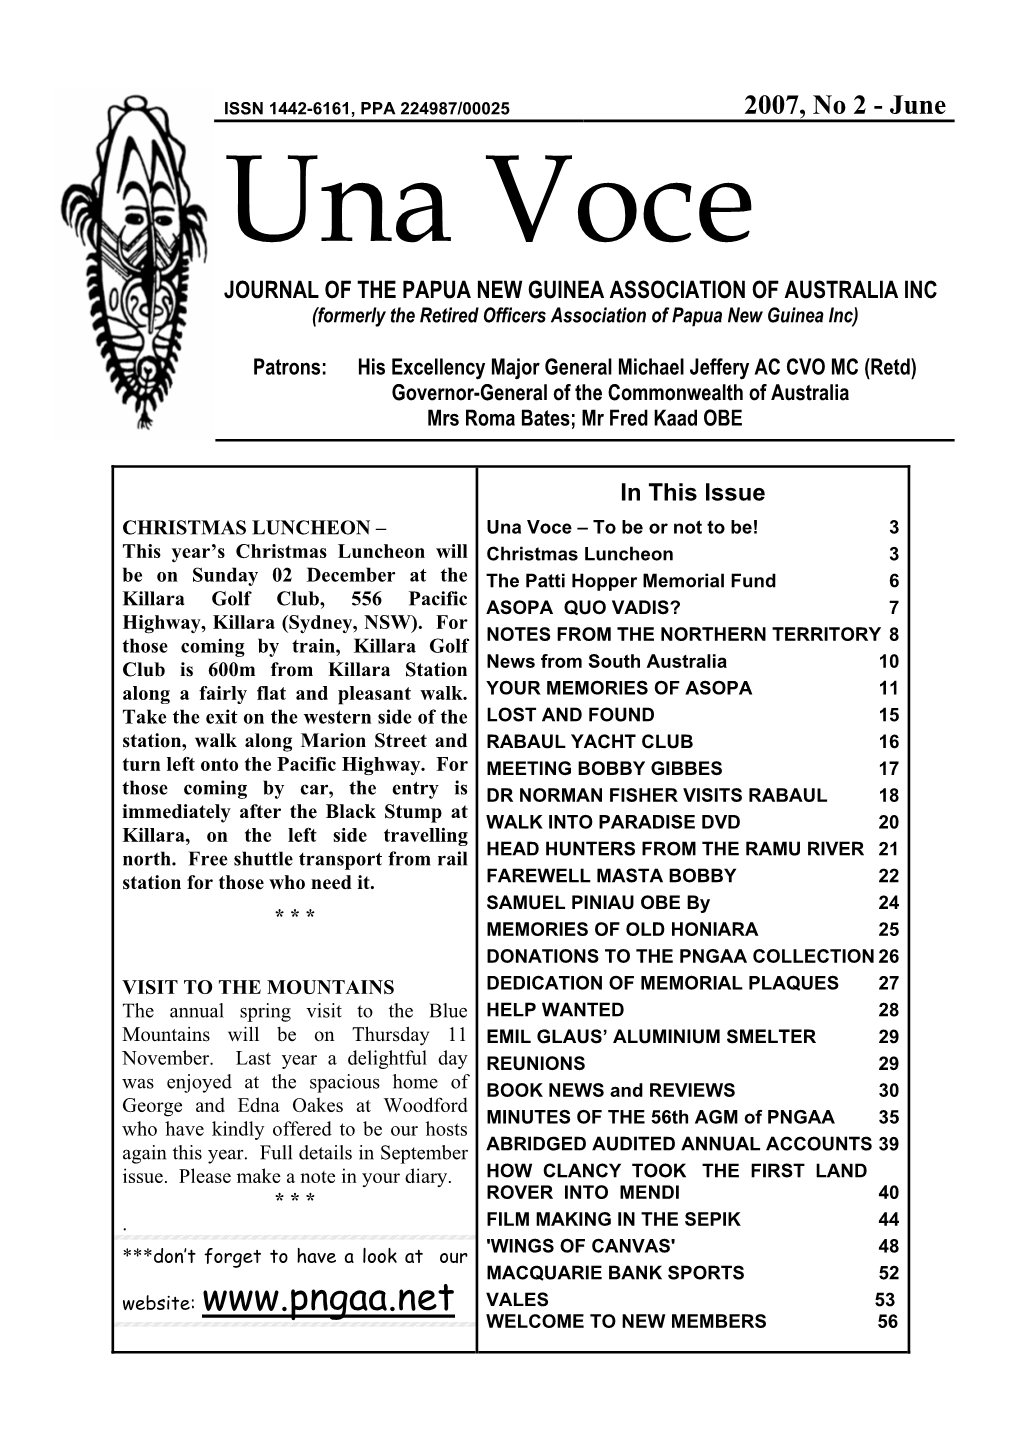 June Una Voce JOURNAL of the PAPUA NEW GUINEA ASSOCIATION of AUSTRALIA INC (Formerly the Retired Officers Association of Papua New Guinea Inc)